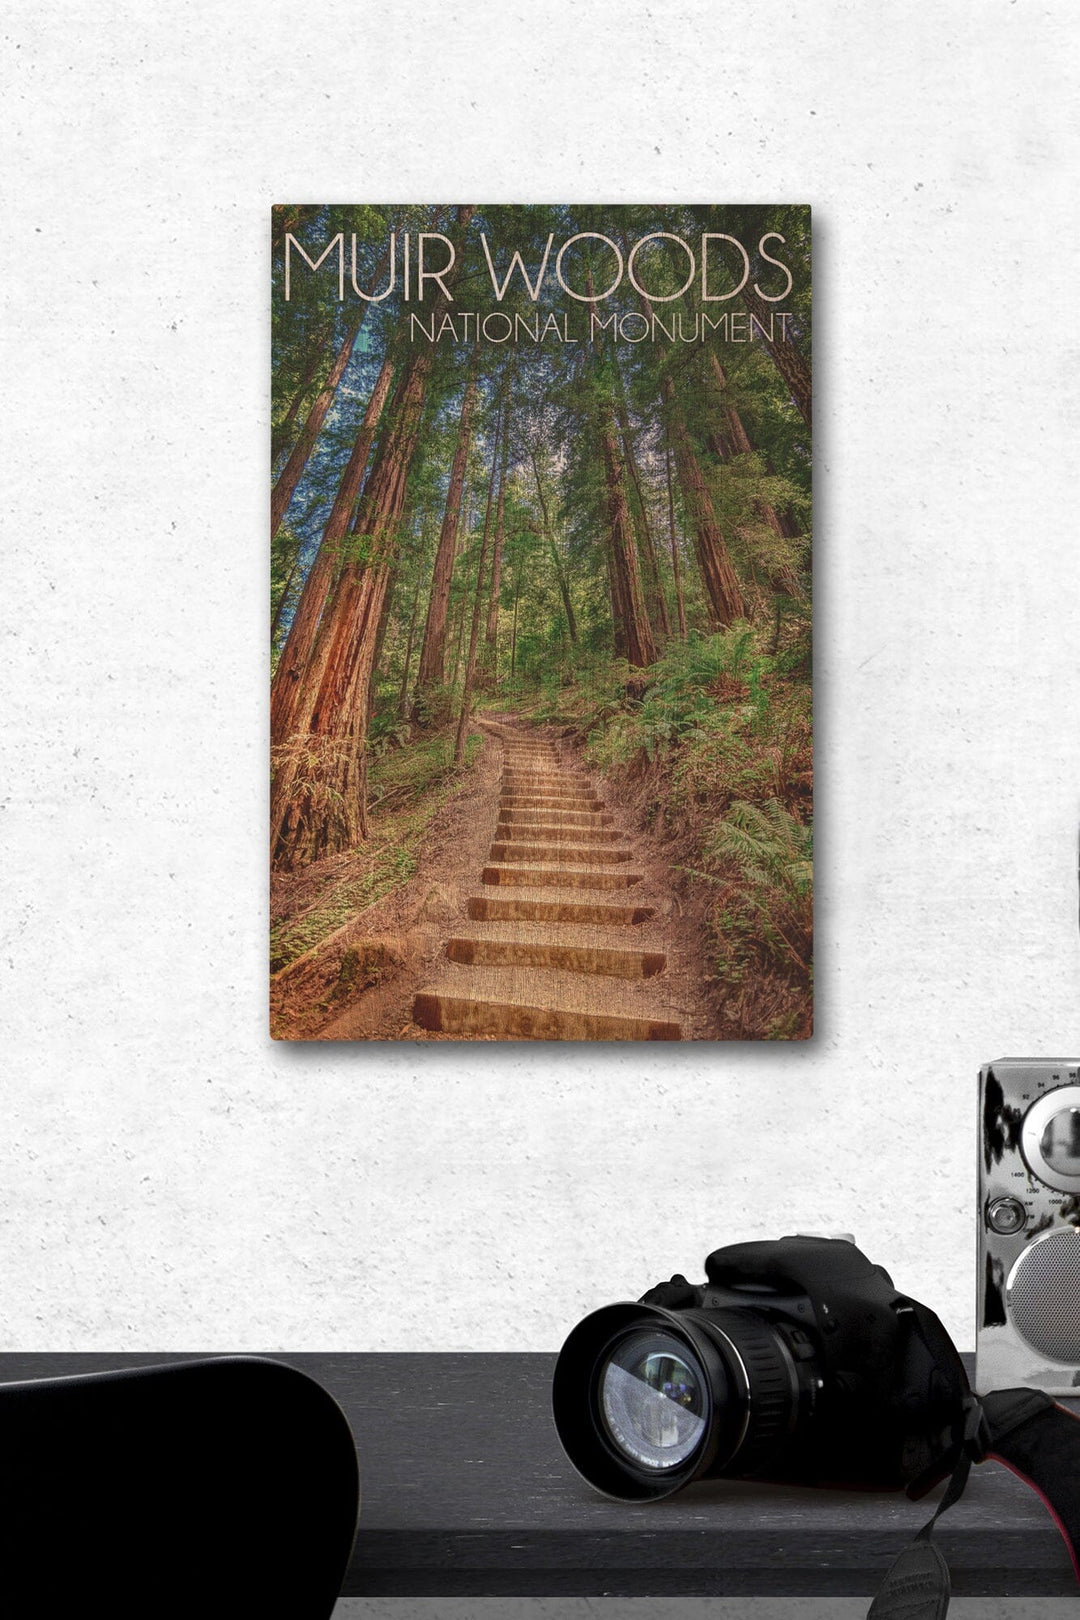 Muir Woods National Monument, California, Stairs Photograph, Wood Signs and Postcards Wood Lantern Press 12 x 18 Wood Gallery Print 